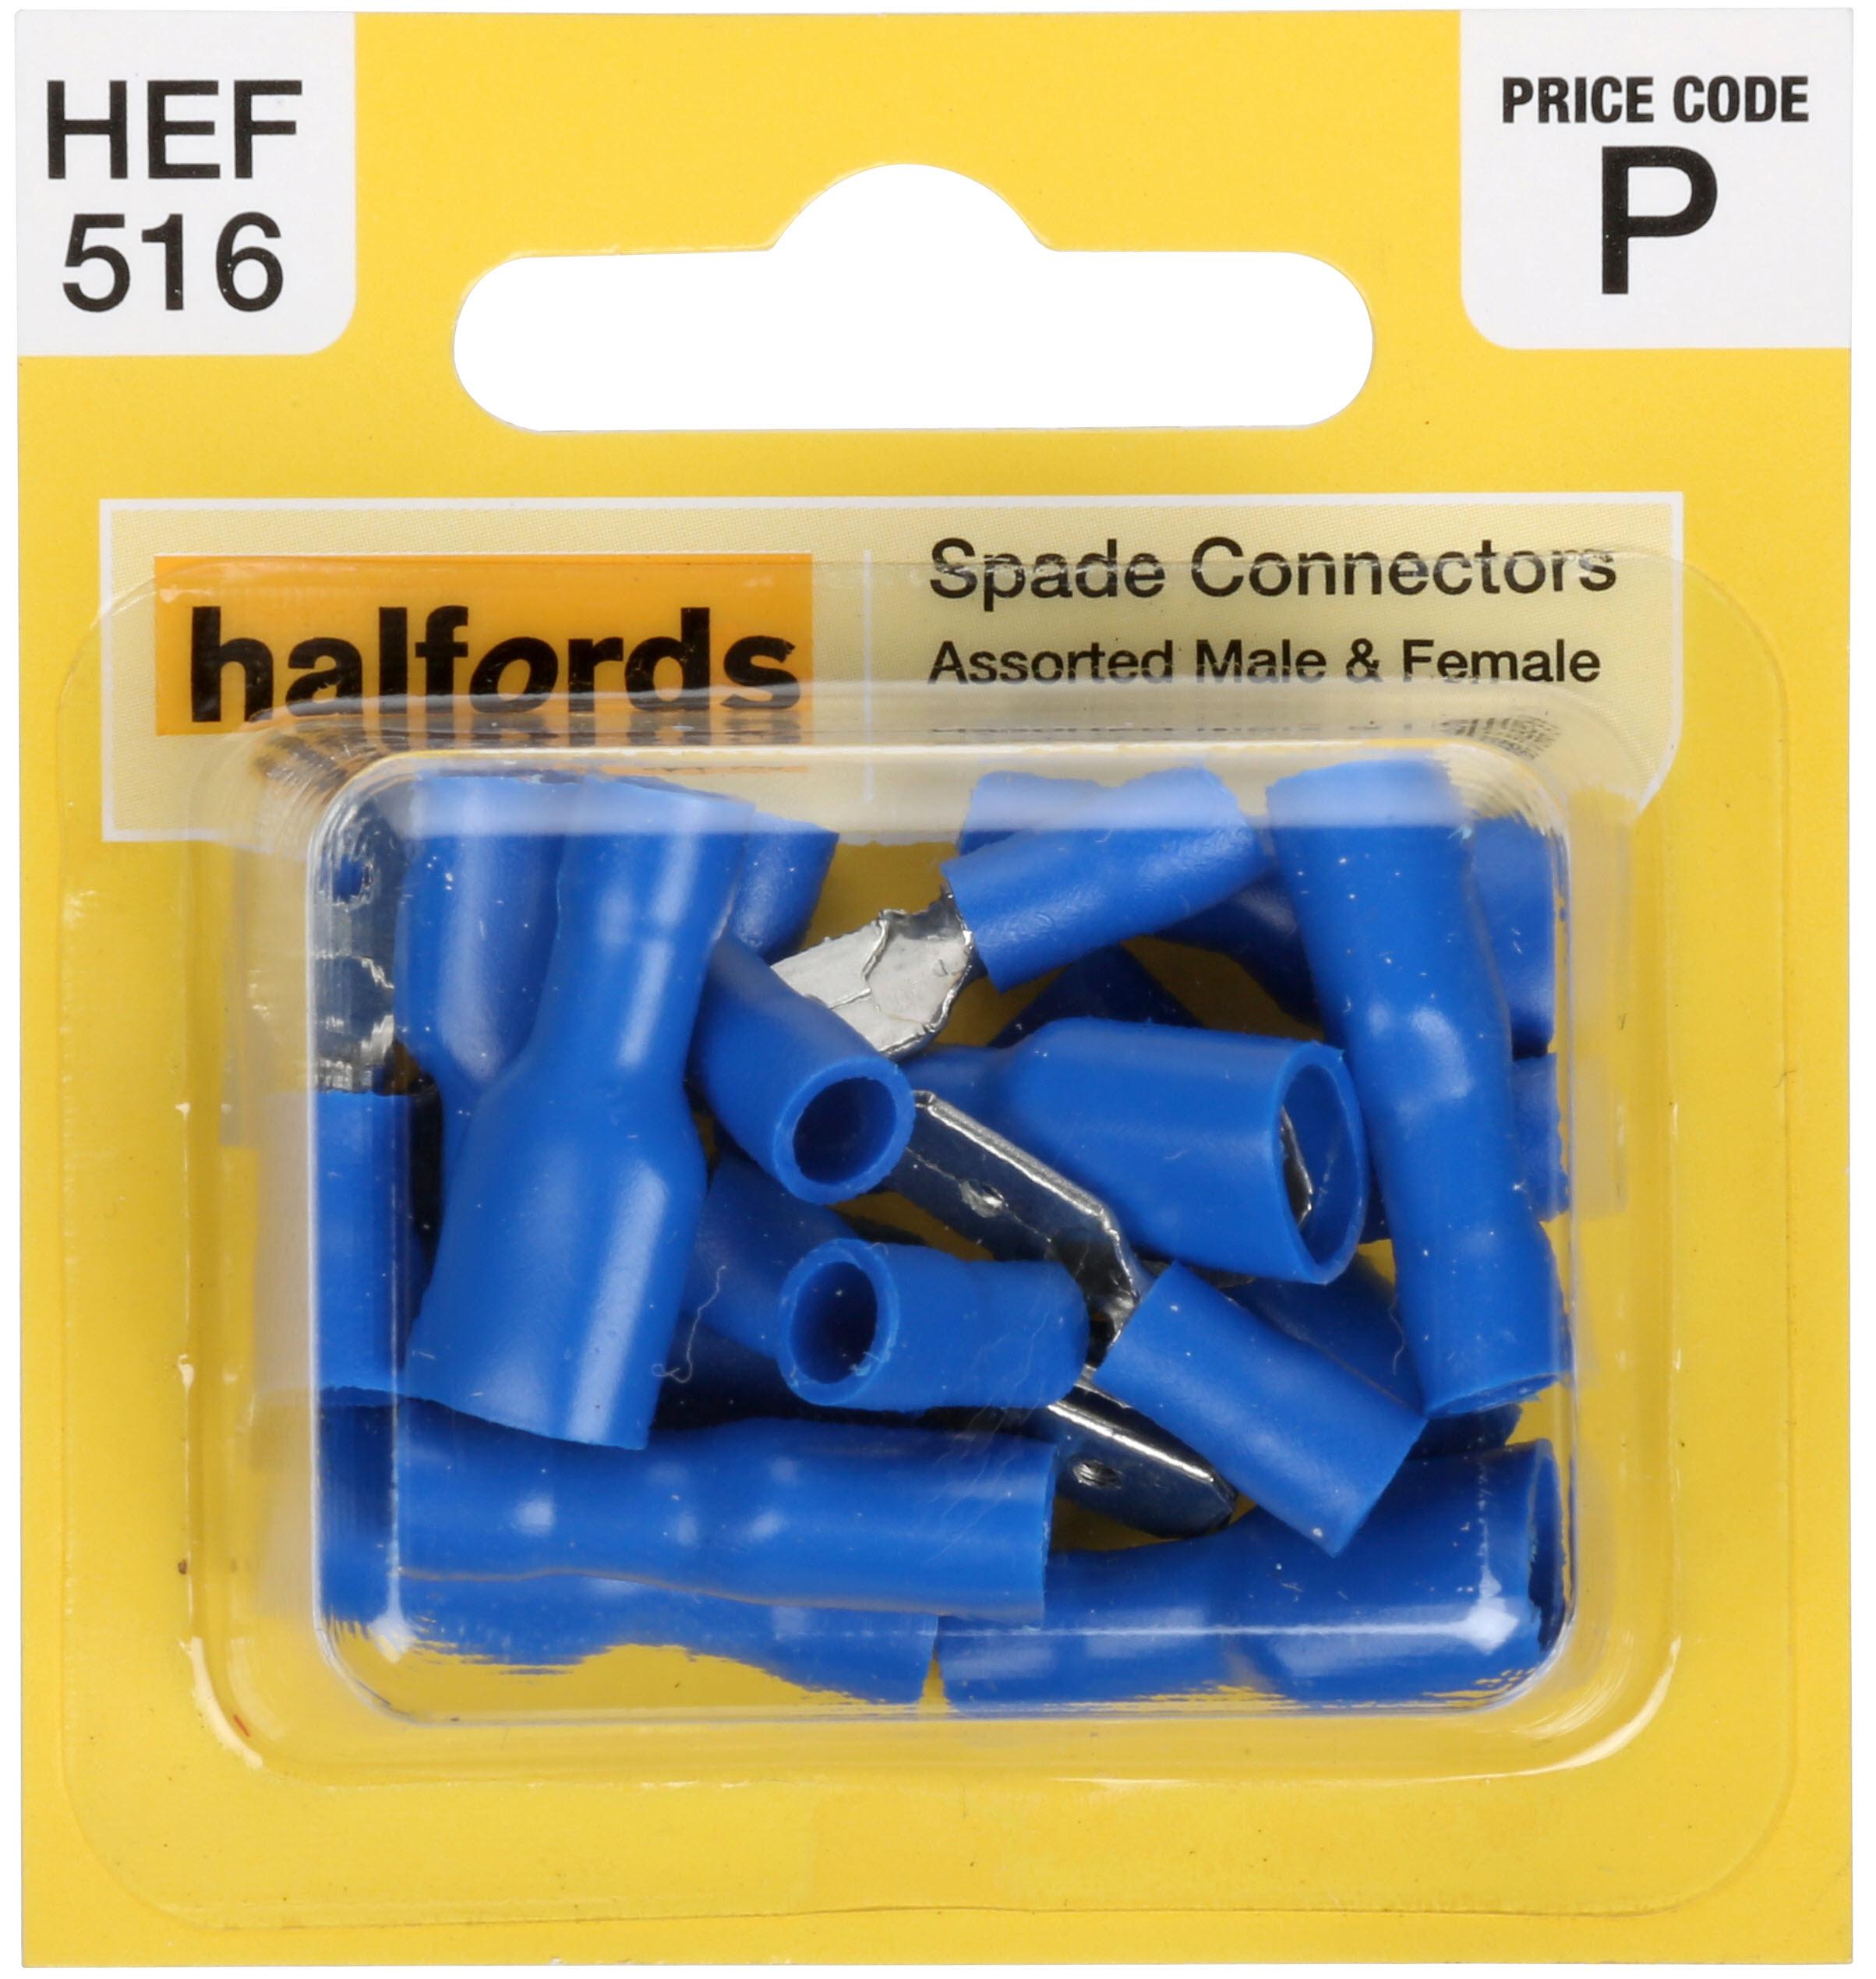 Halfords Assorted Spade Connectors (Hef516) Male & Female